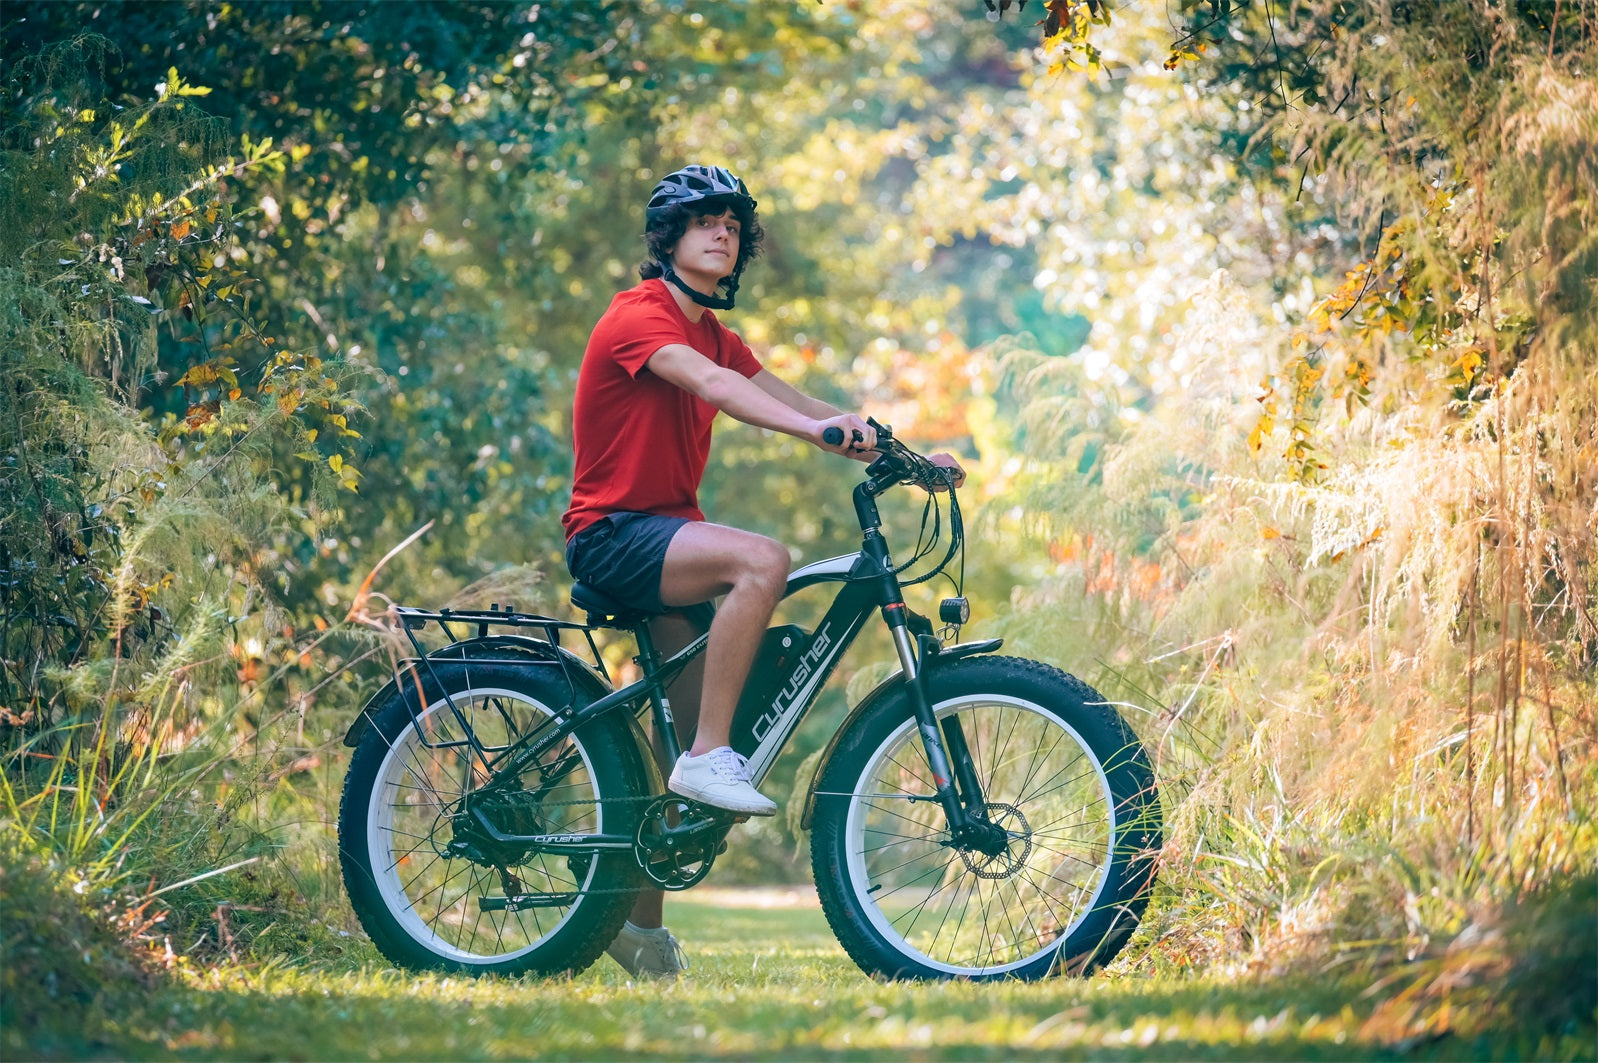 Cyrusher XF650-The Best E-Bikes for Beginners, According to Experts